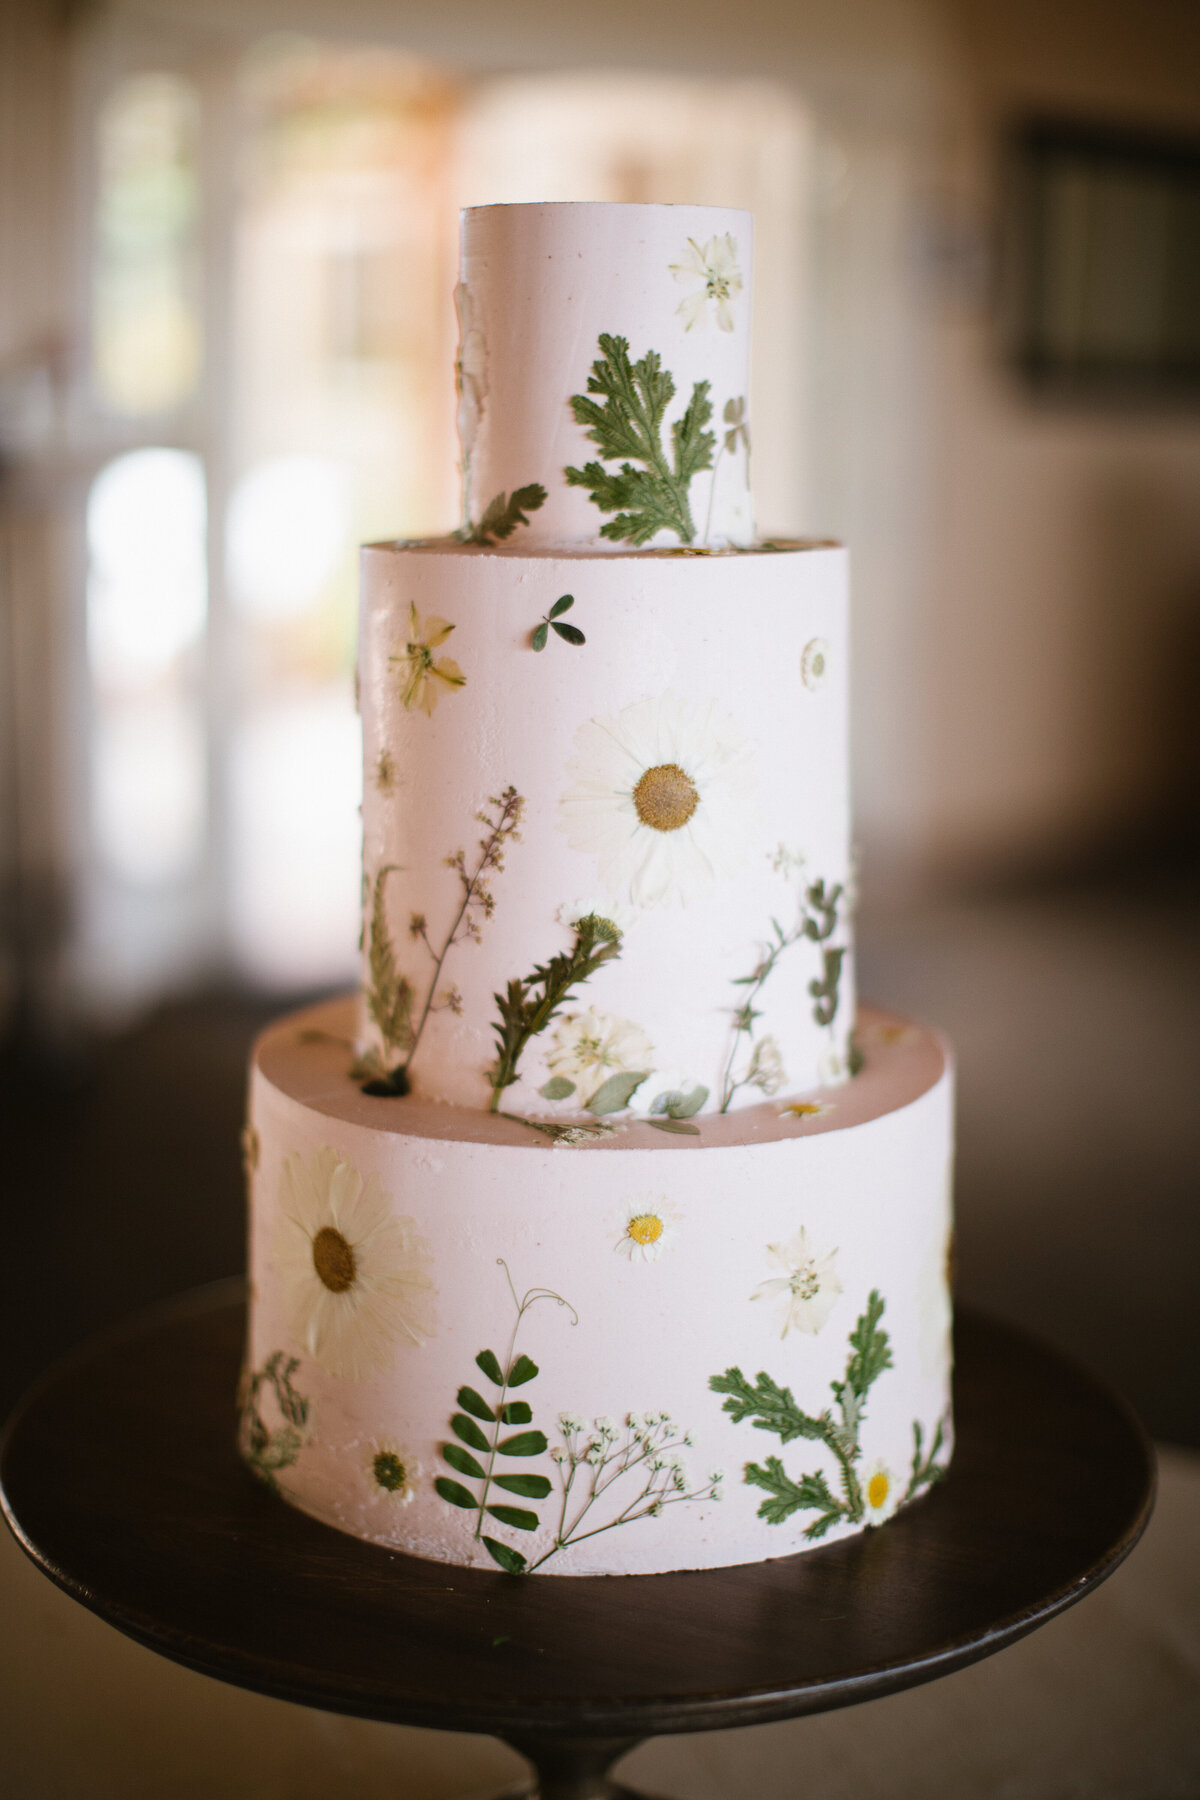 A wedding cake with leaves